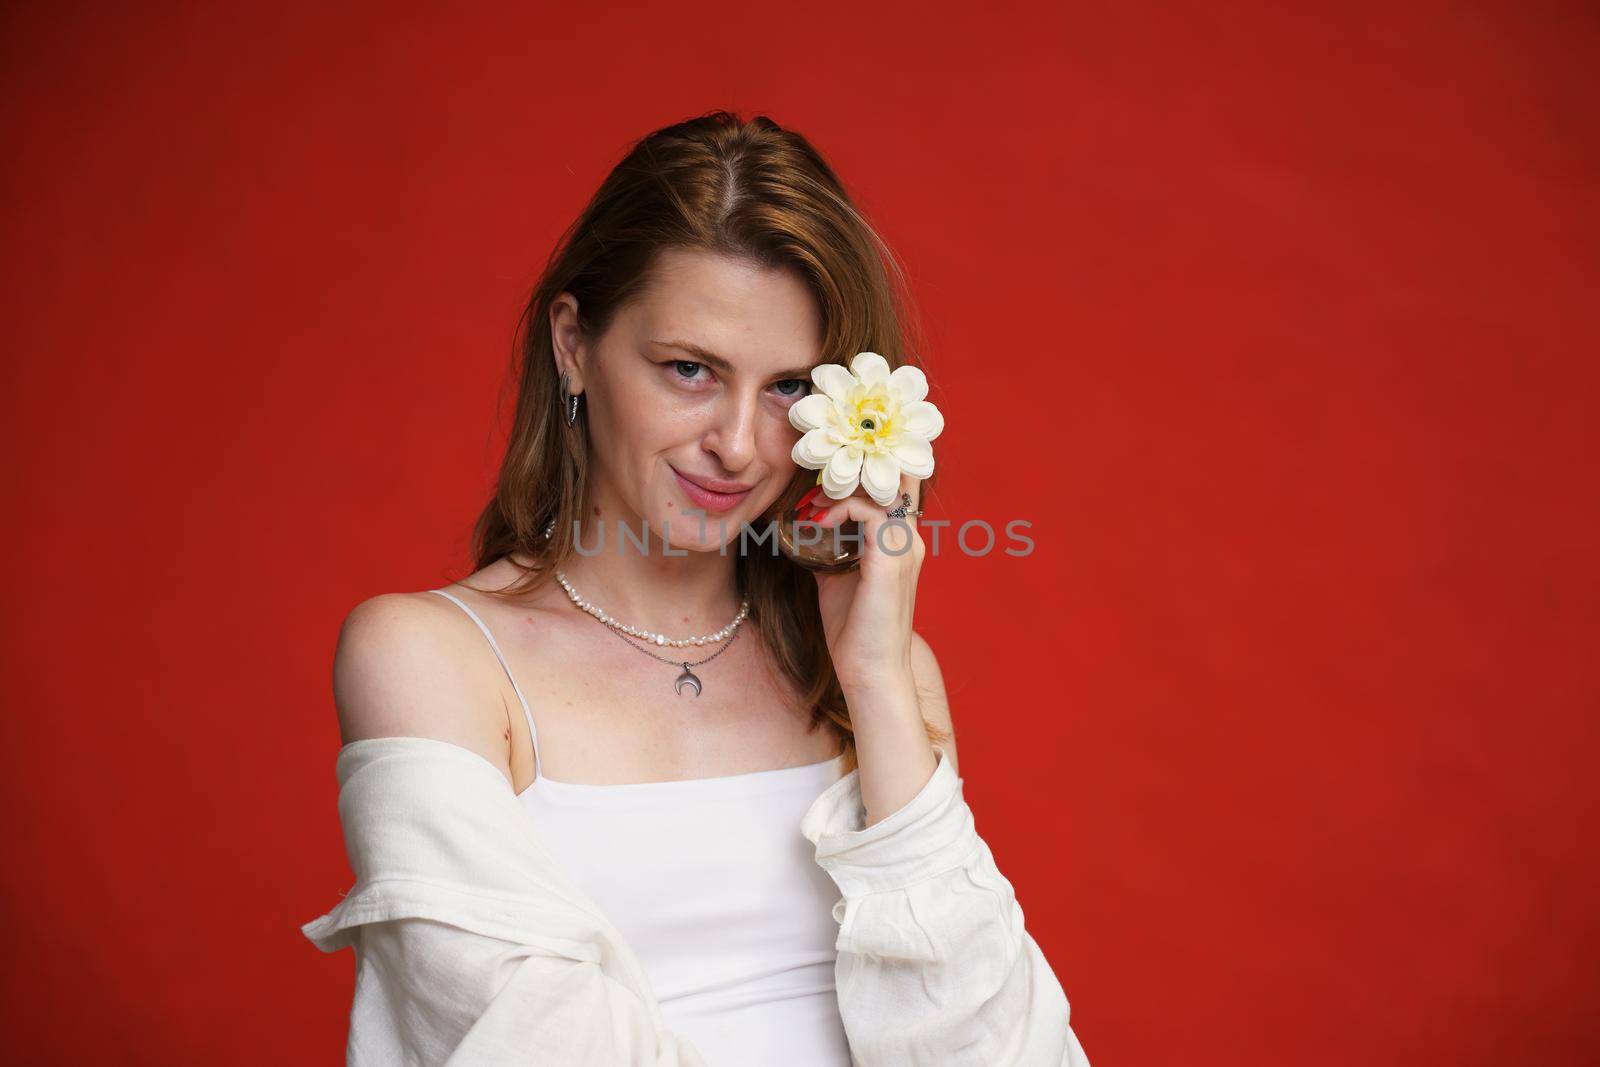 portrait with flower cute young caucasian girl with a smile on a red background in the studio by chichaevstudio